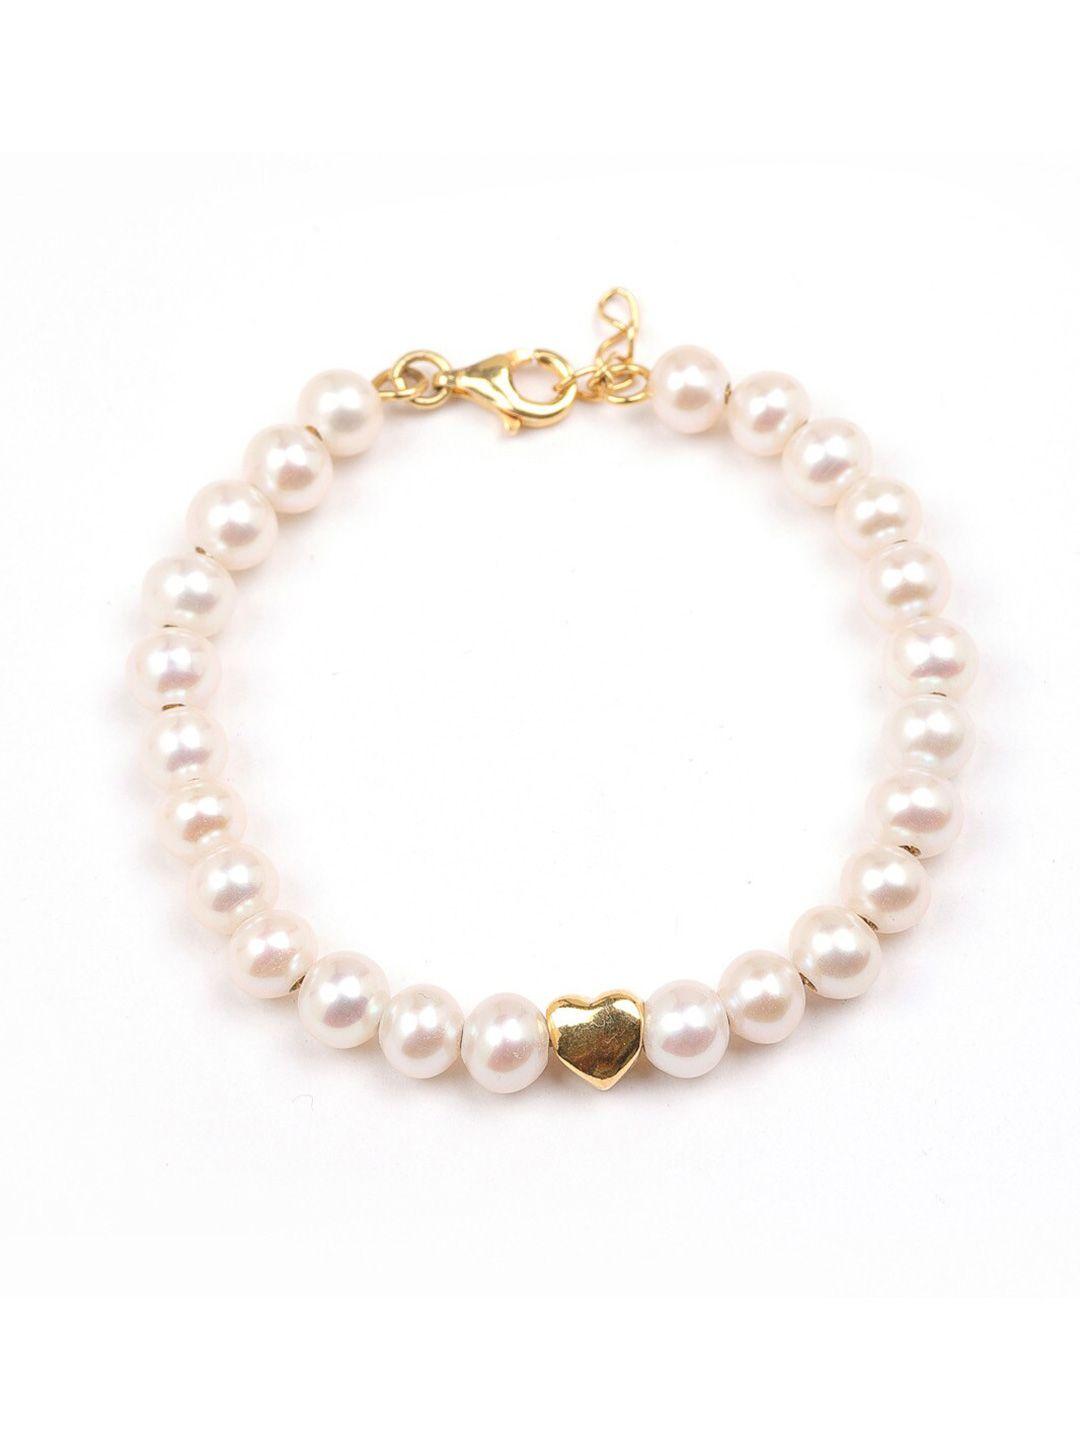 stone story by shruti girls white sterling silver pearls handcrafted gold-plated charm bracelet